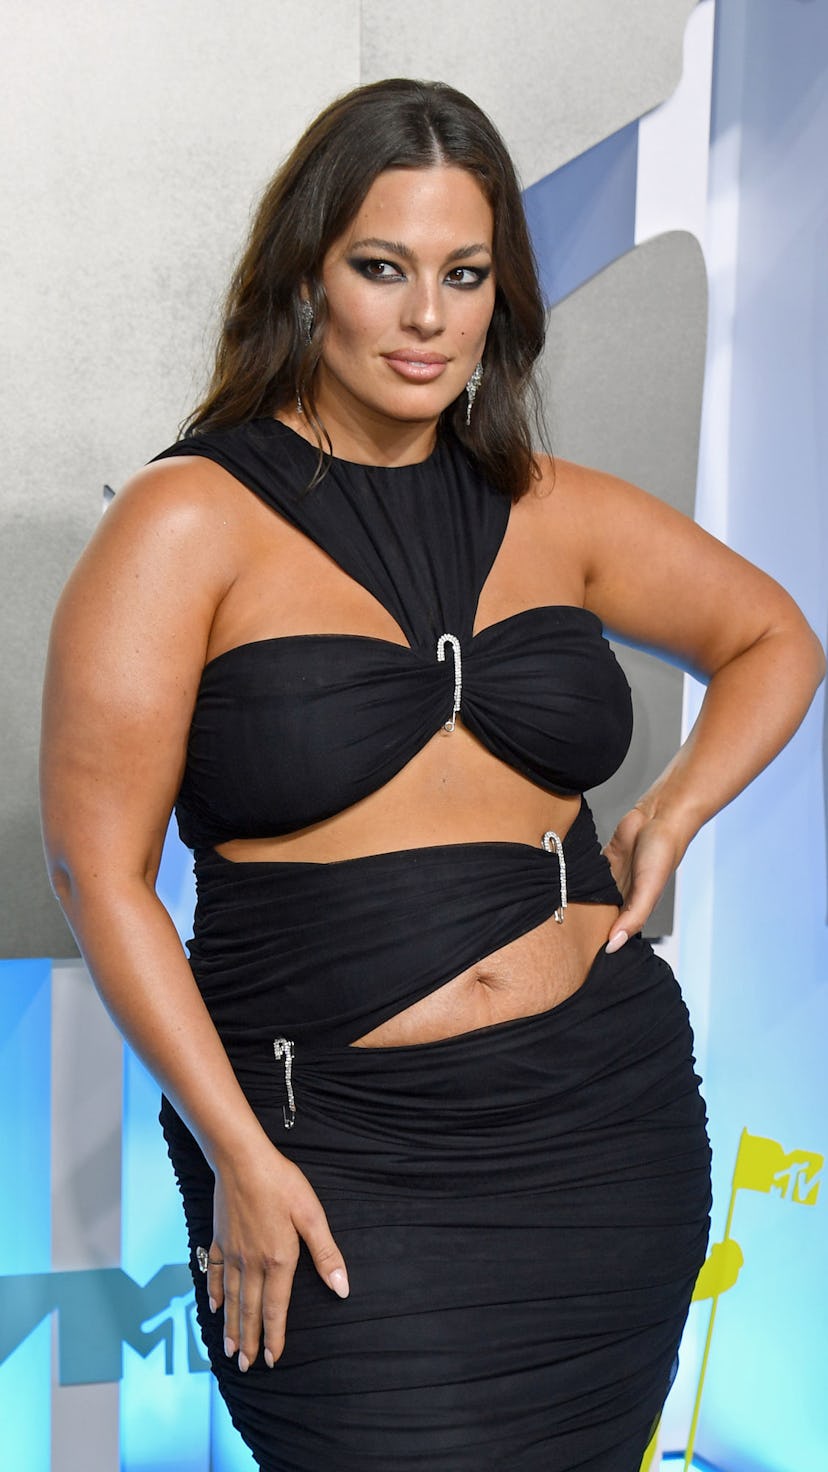 Ashley Graham attending the MTV Video Music Awards 2022 held at the Prudential Center in Newark, New...